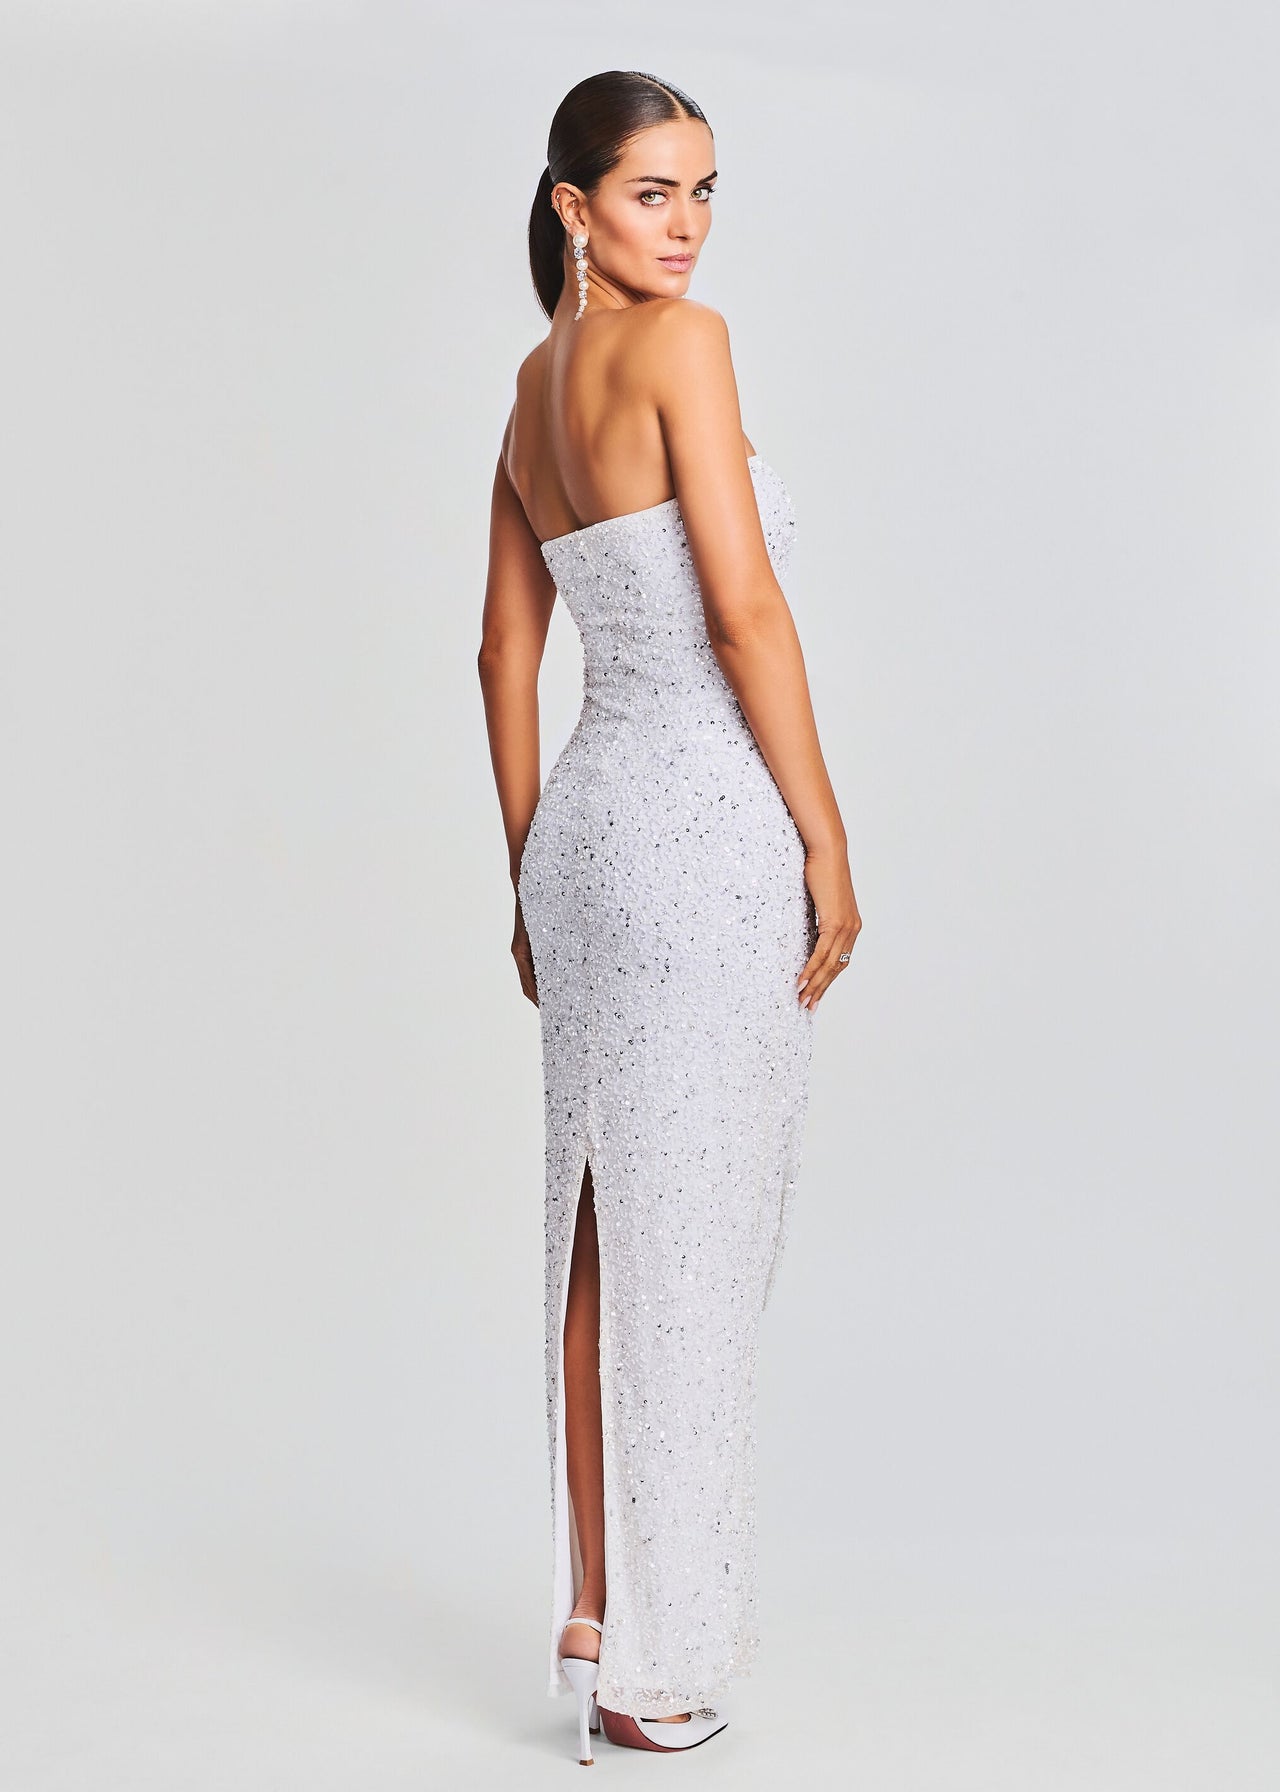 Riverly Sequin Dress